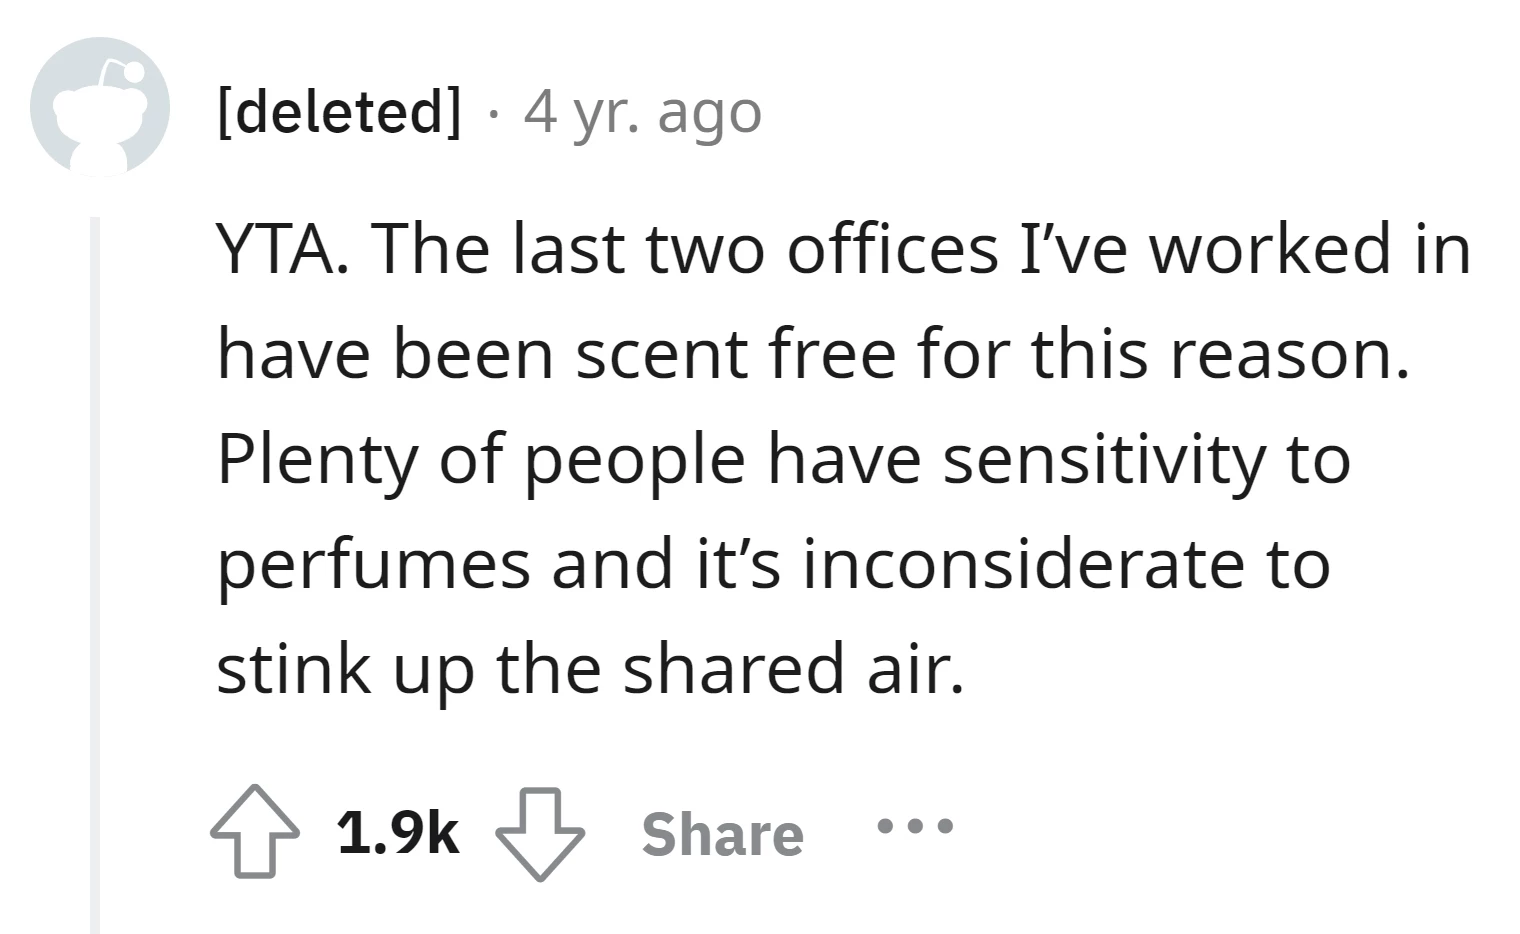 It's inconsiderate to use strong scents in shared spaces